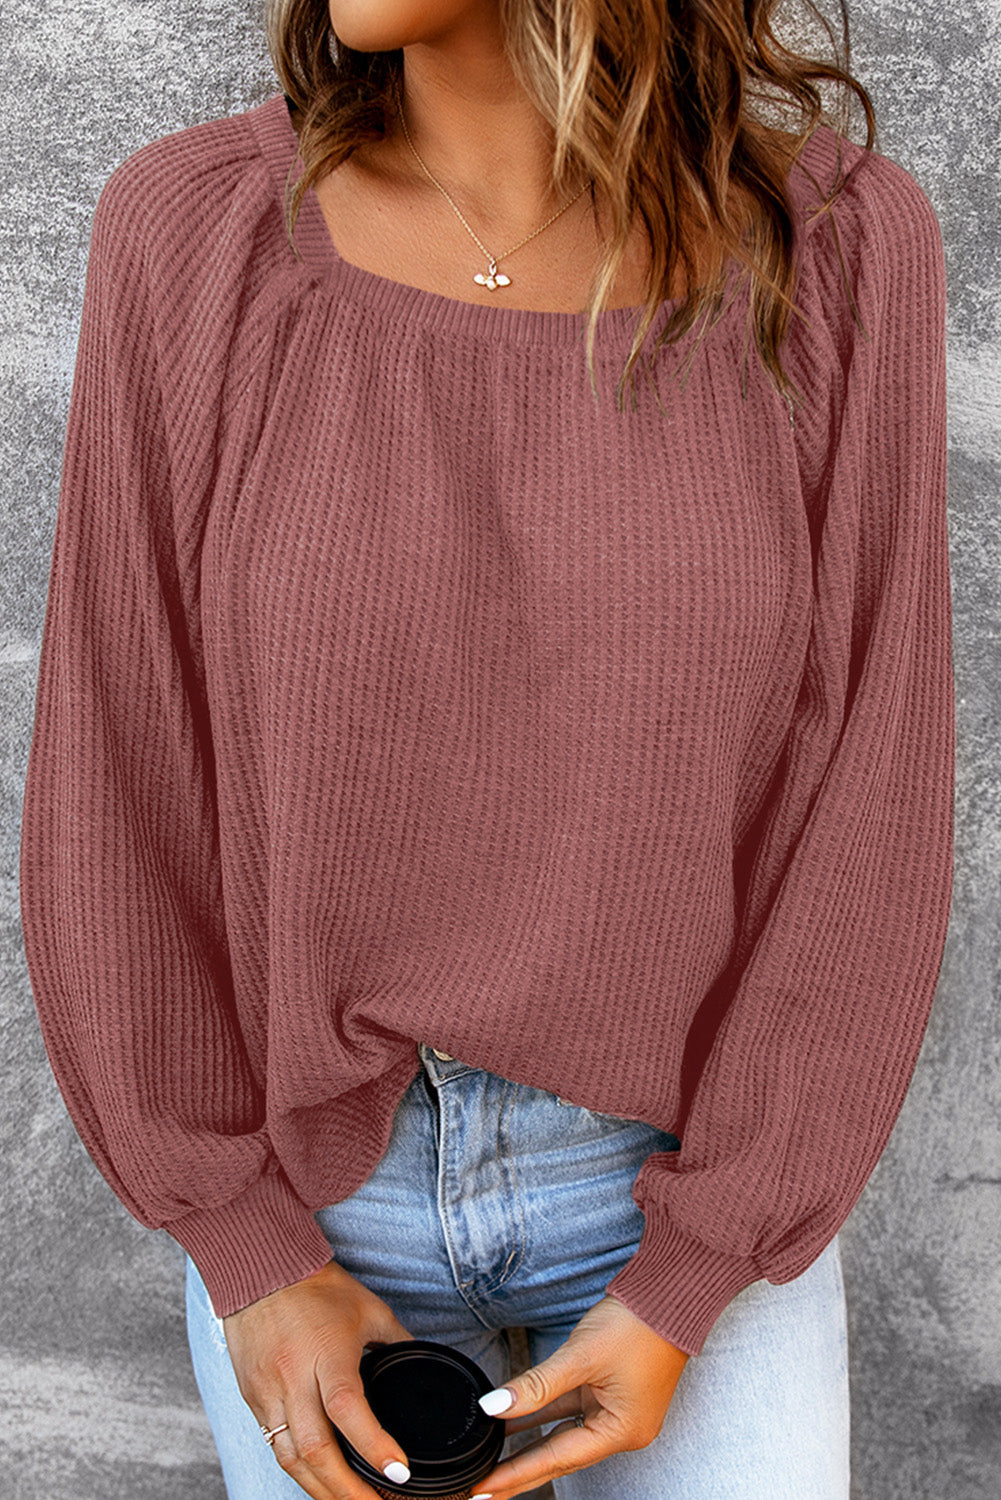 Black Scoop Neck Puff Sleeve Waffle Knit Top